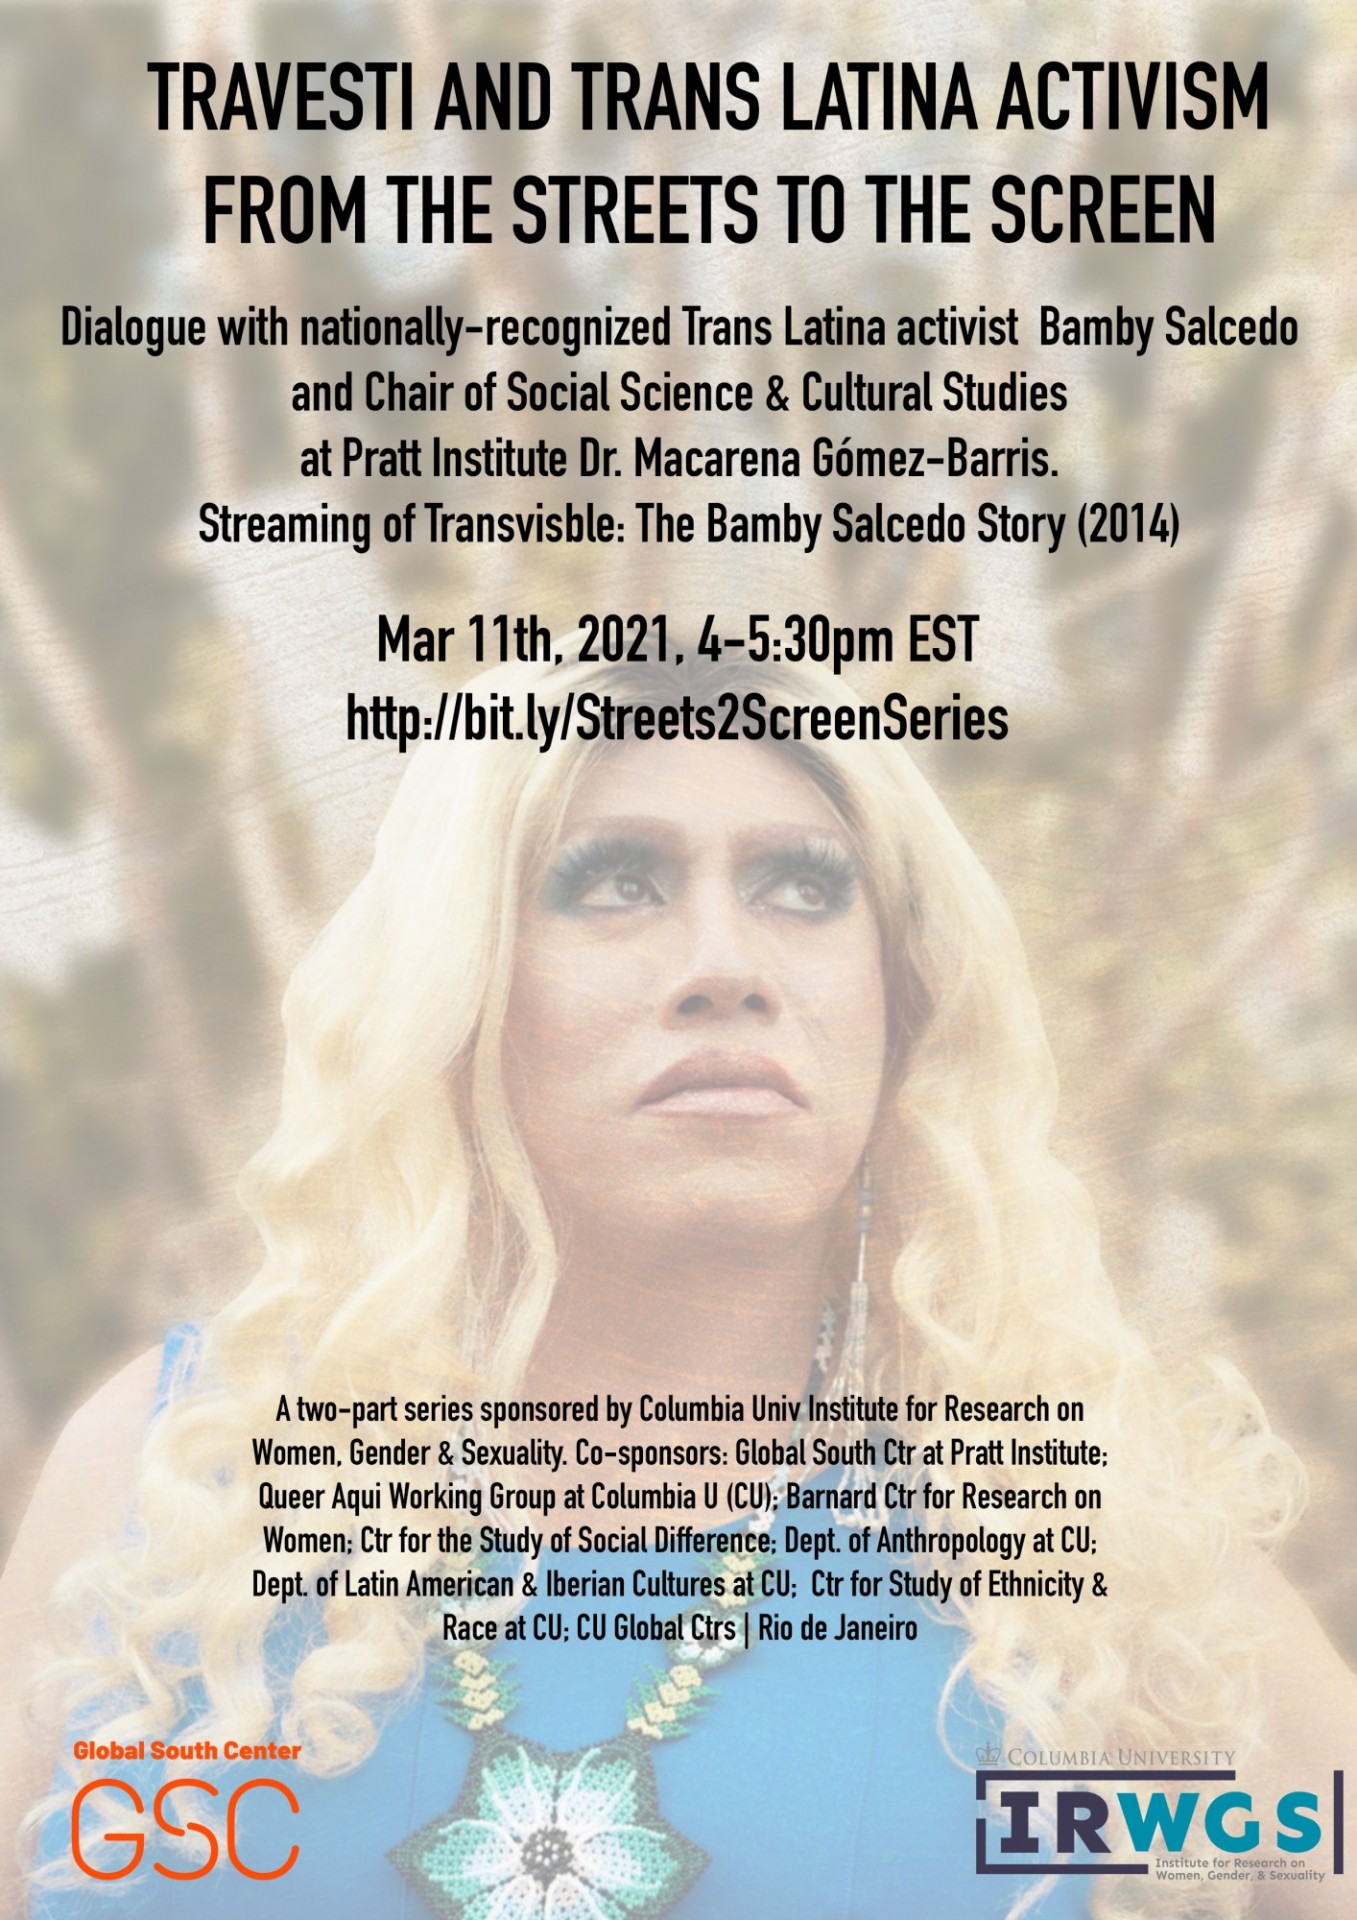 Flyer from March 11th Travesti and Trans Latina Activism - From the Streets to the Screen - Bamby Salcedo